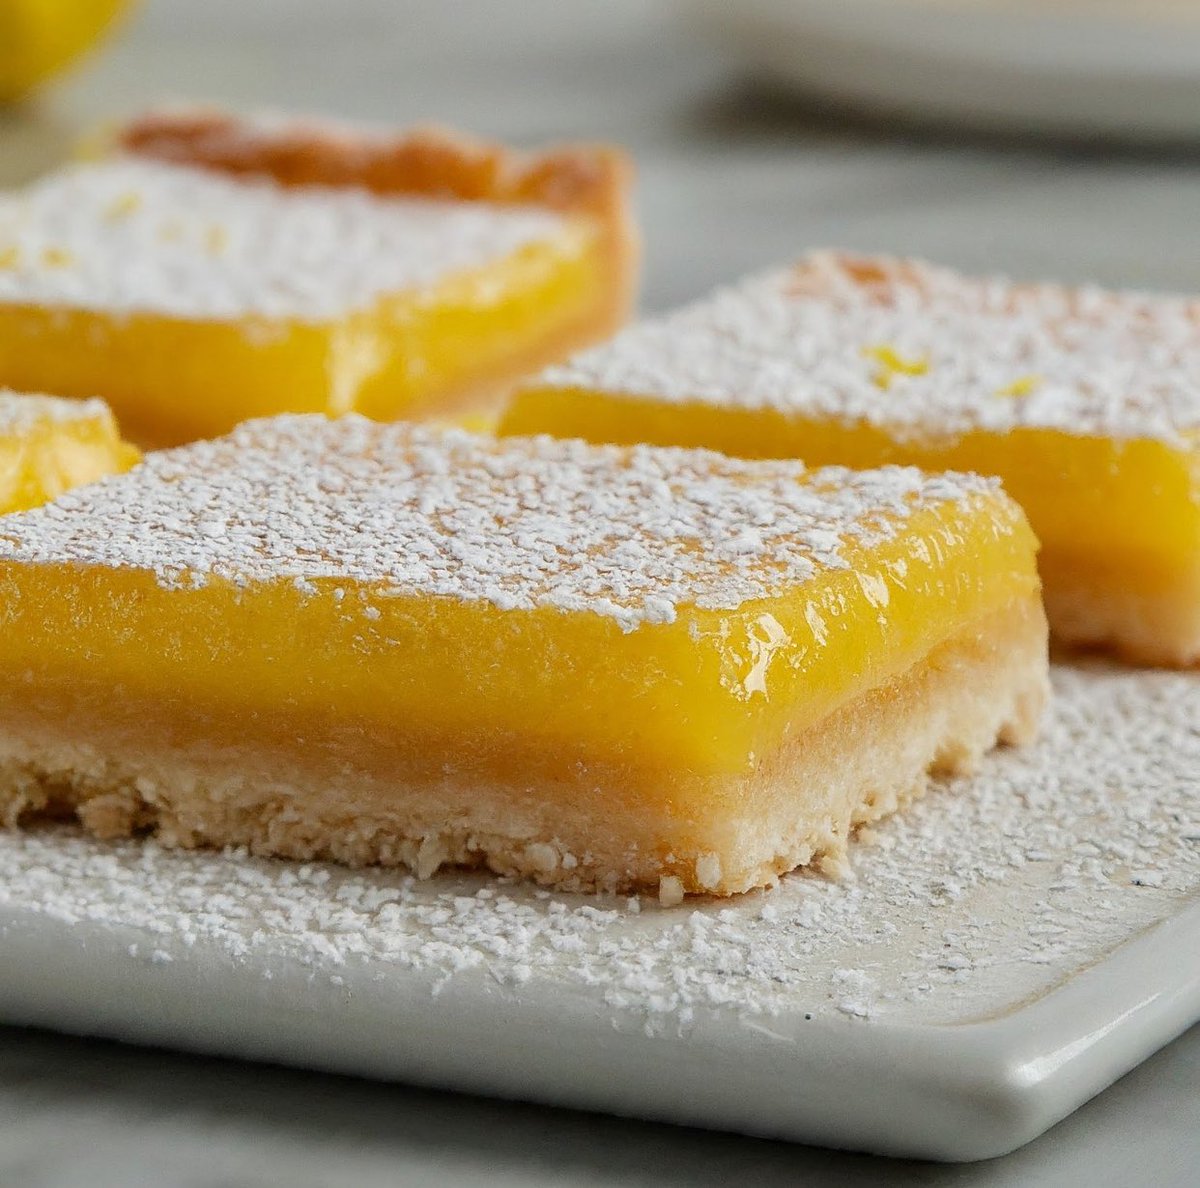 Lemon Bars Easy Recipe - This is a great dessert to present at any gathering! Give it a try! Let me know what you think.
robertfwest.com/2024/05/lemon-…
#lemonbars #dessert #desserttime #dessertlover #dessertrecipe #recipes #foodblogger #foodlover #baking